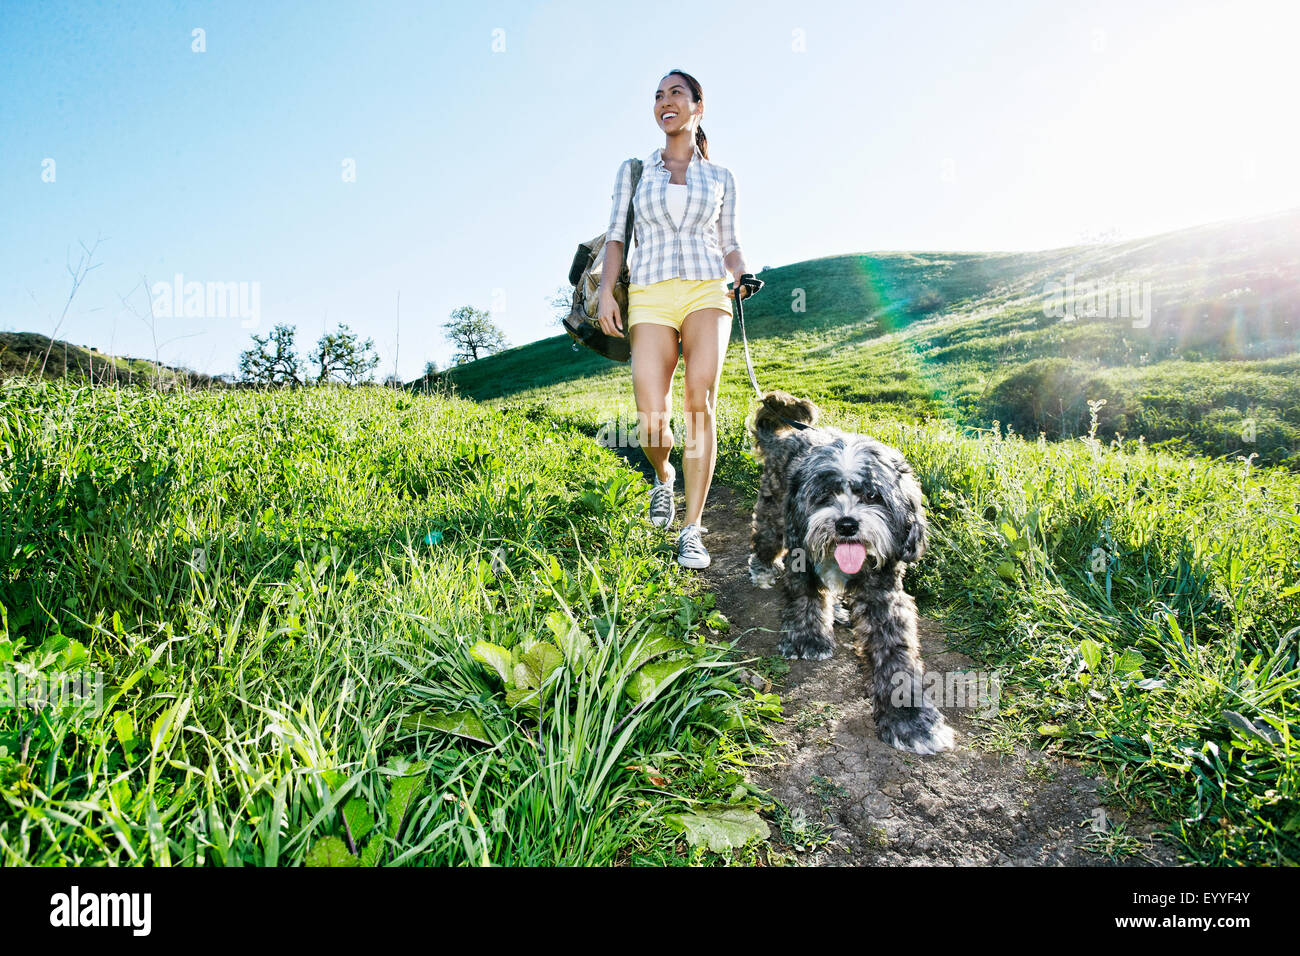 Mixed Race woman walking dog on grassy hillside Banque D'Images